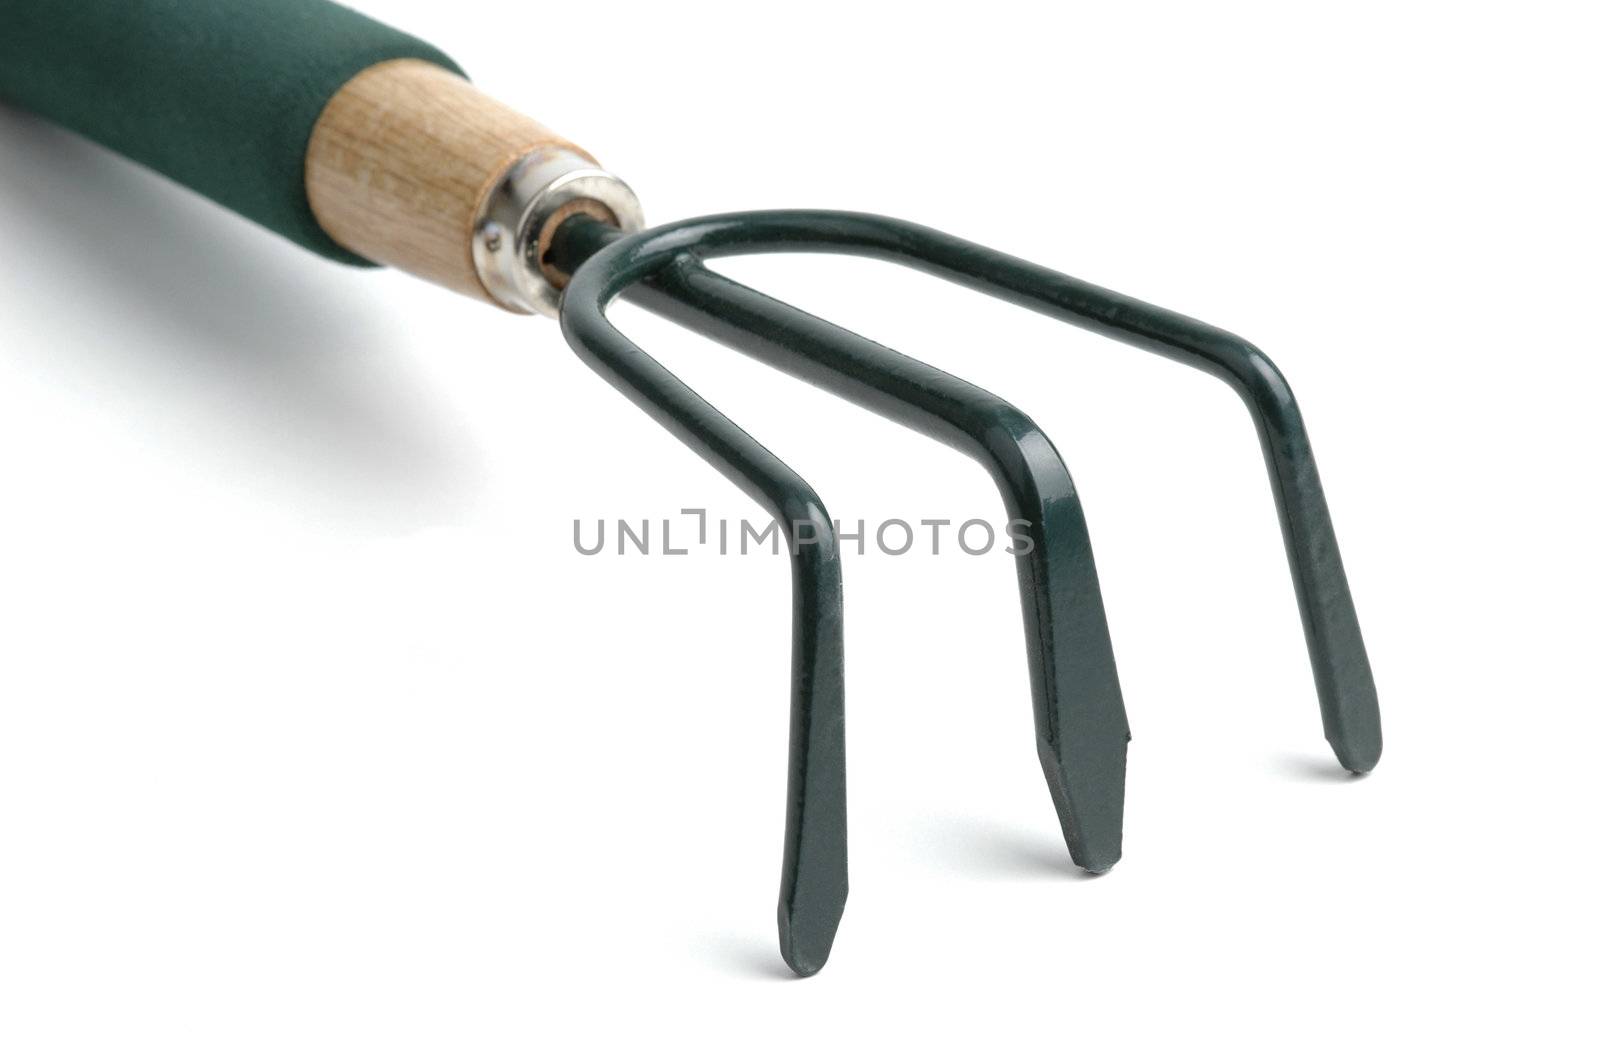 Green garden cultivator close-up on a white background.